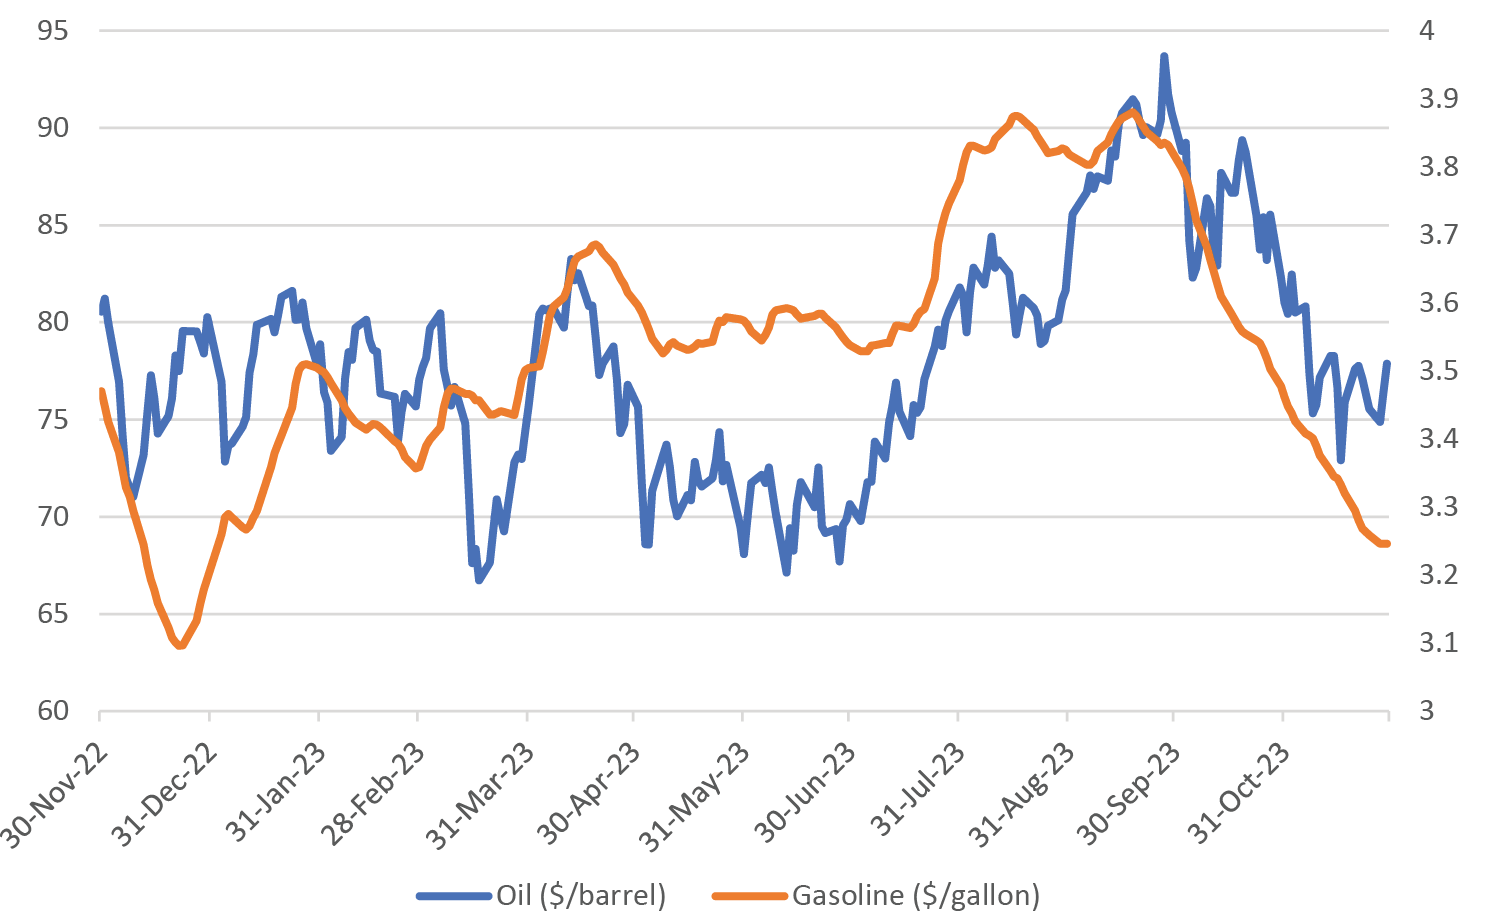 Crude Oil and Gasoline Prices Fell Sharply from September Through November